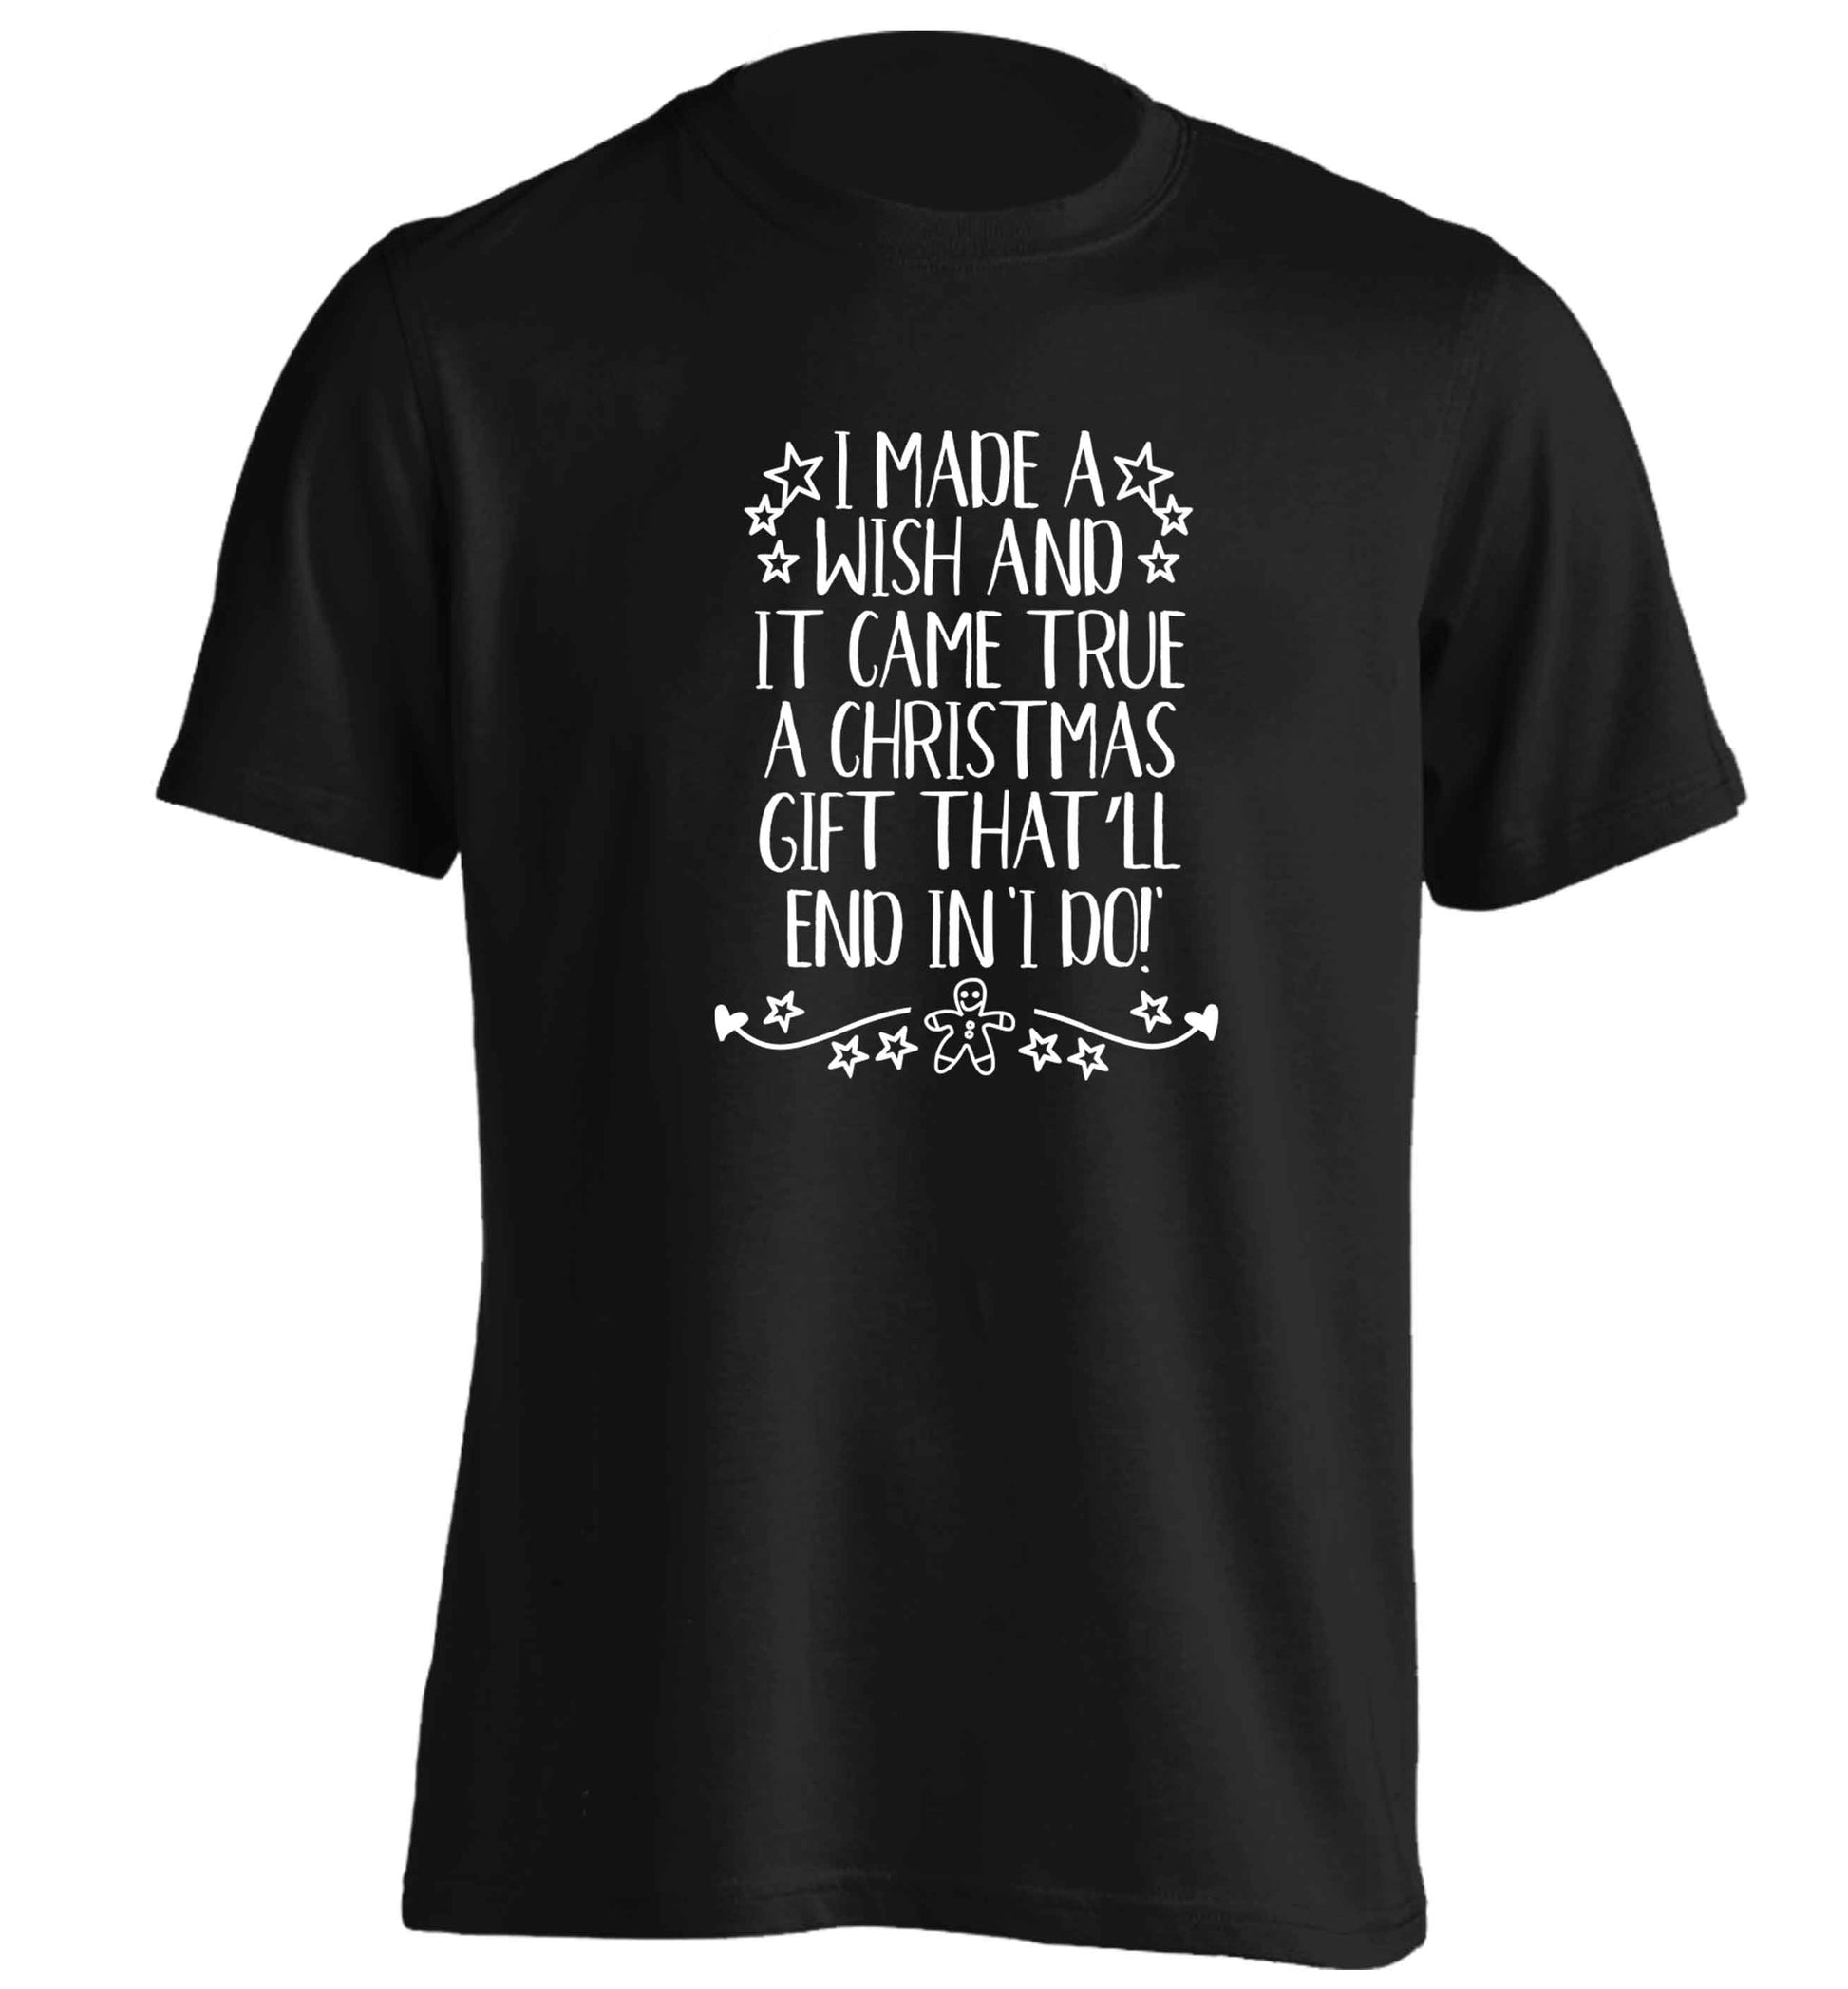 I made a wish and it came true a Christmas gift that'll end in 'I do' adults unisex black Tshirt 2XL